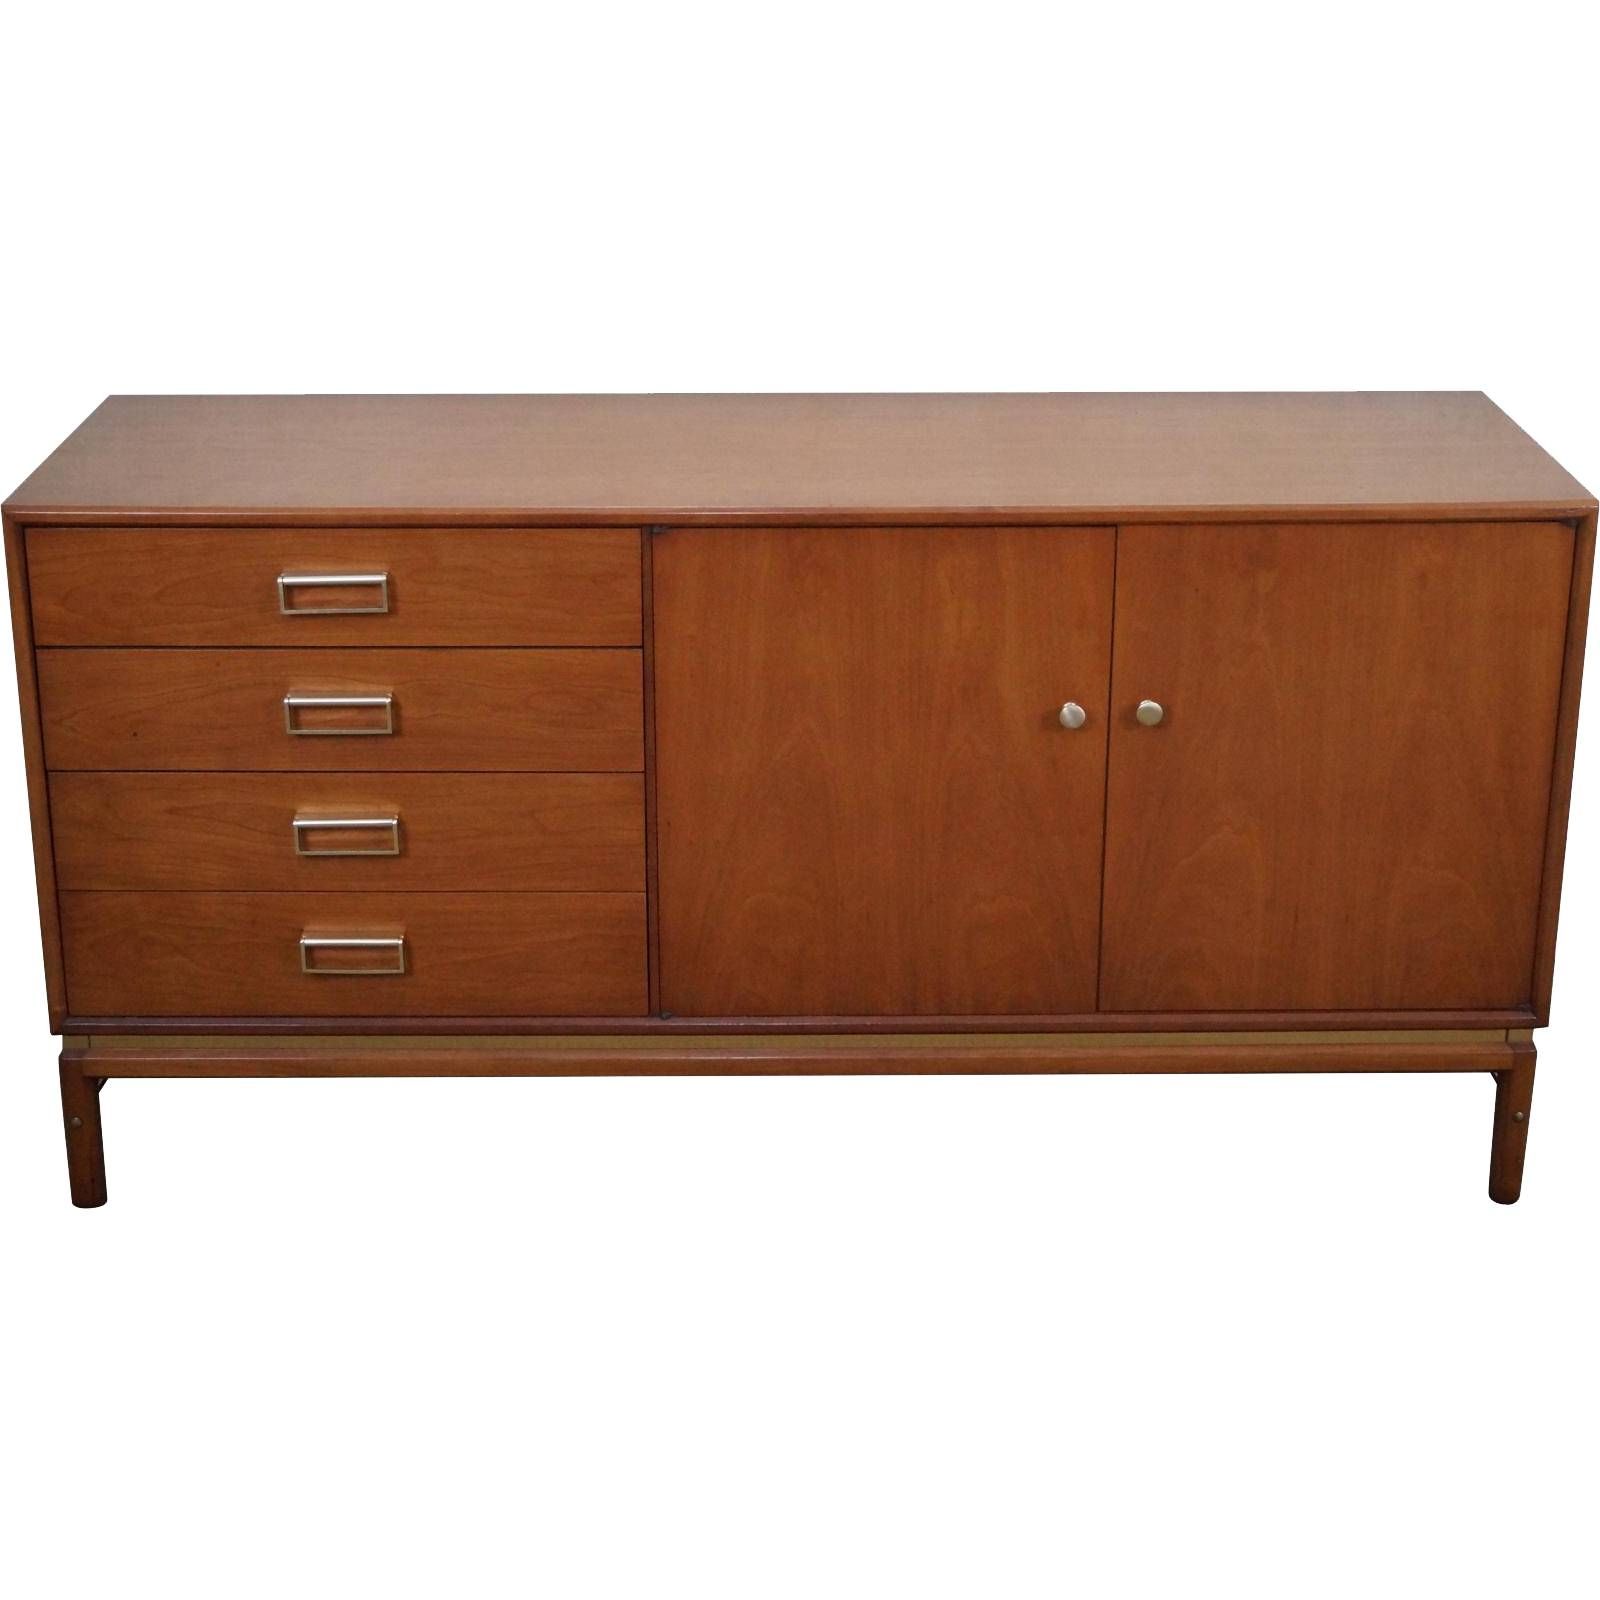 Drexel Suncoast Kipp Stewart Mid Century Modern Sideboard From Intended For Mid Century Modern Sideboards (View 11 of 15)